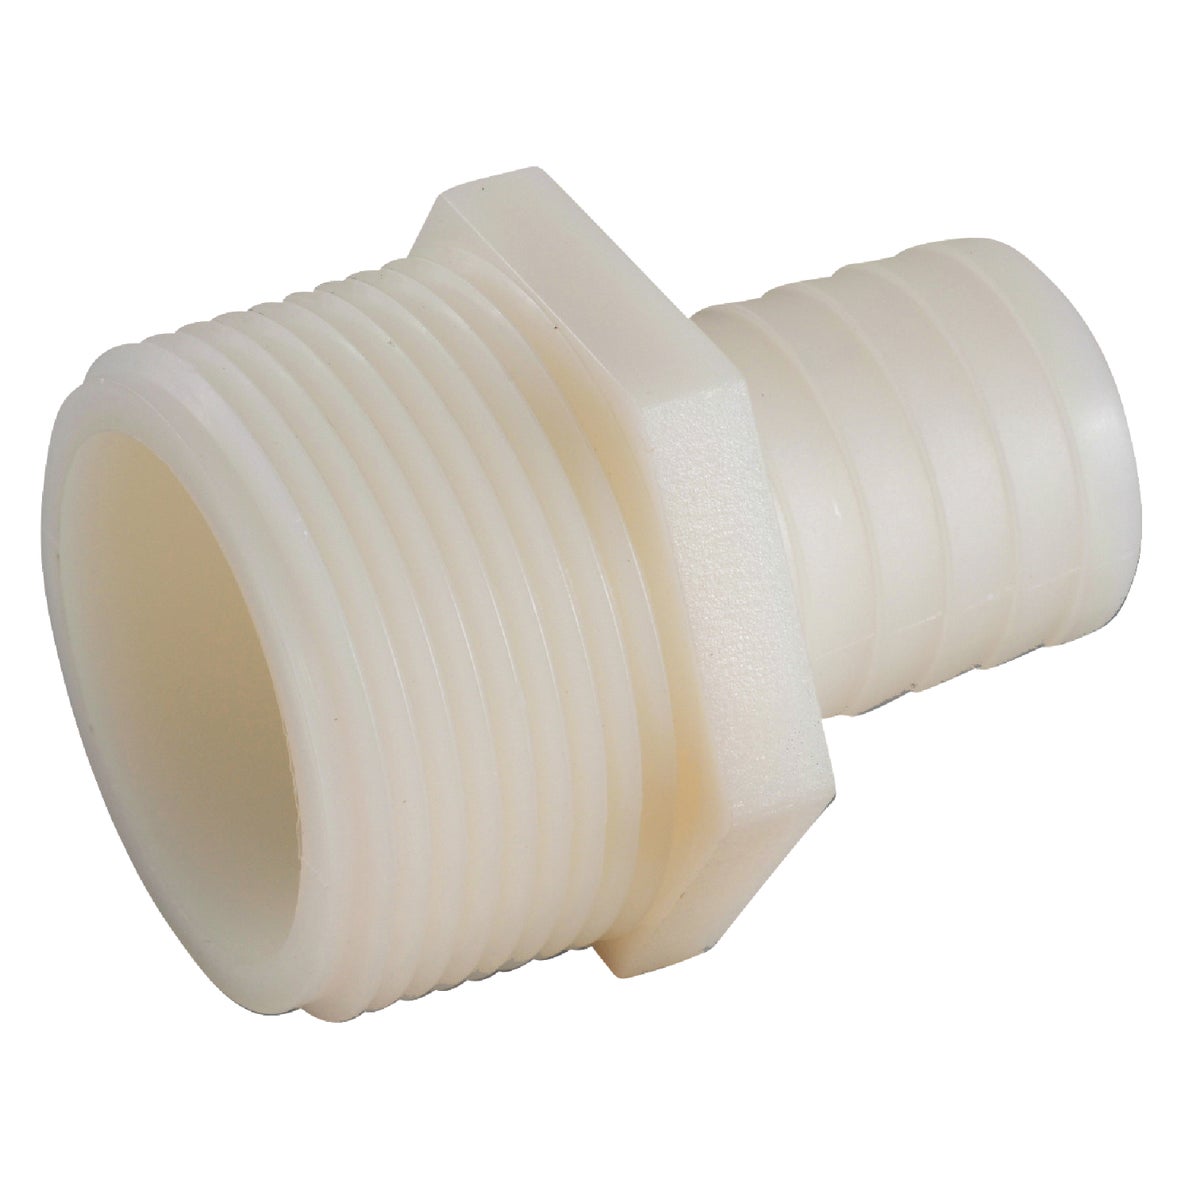 Item 486957, Barb x MIP (male iron pipe) nylon connector